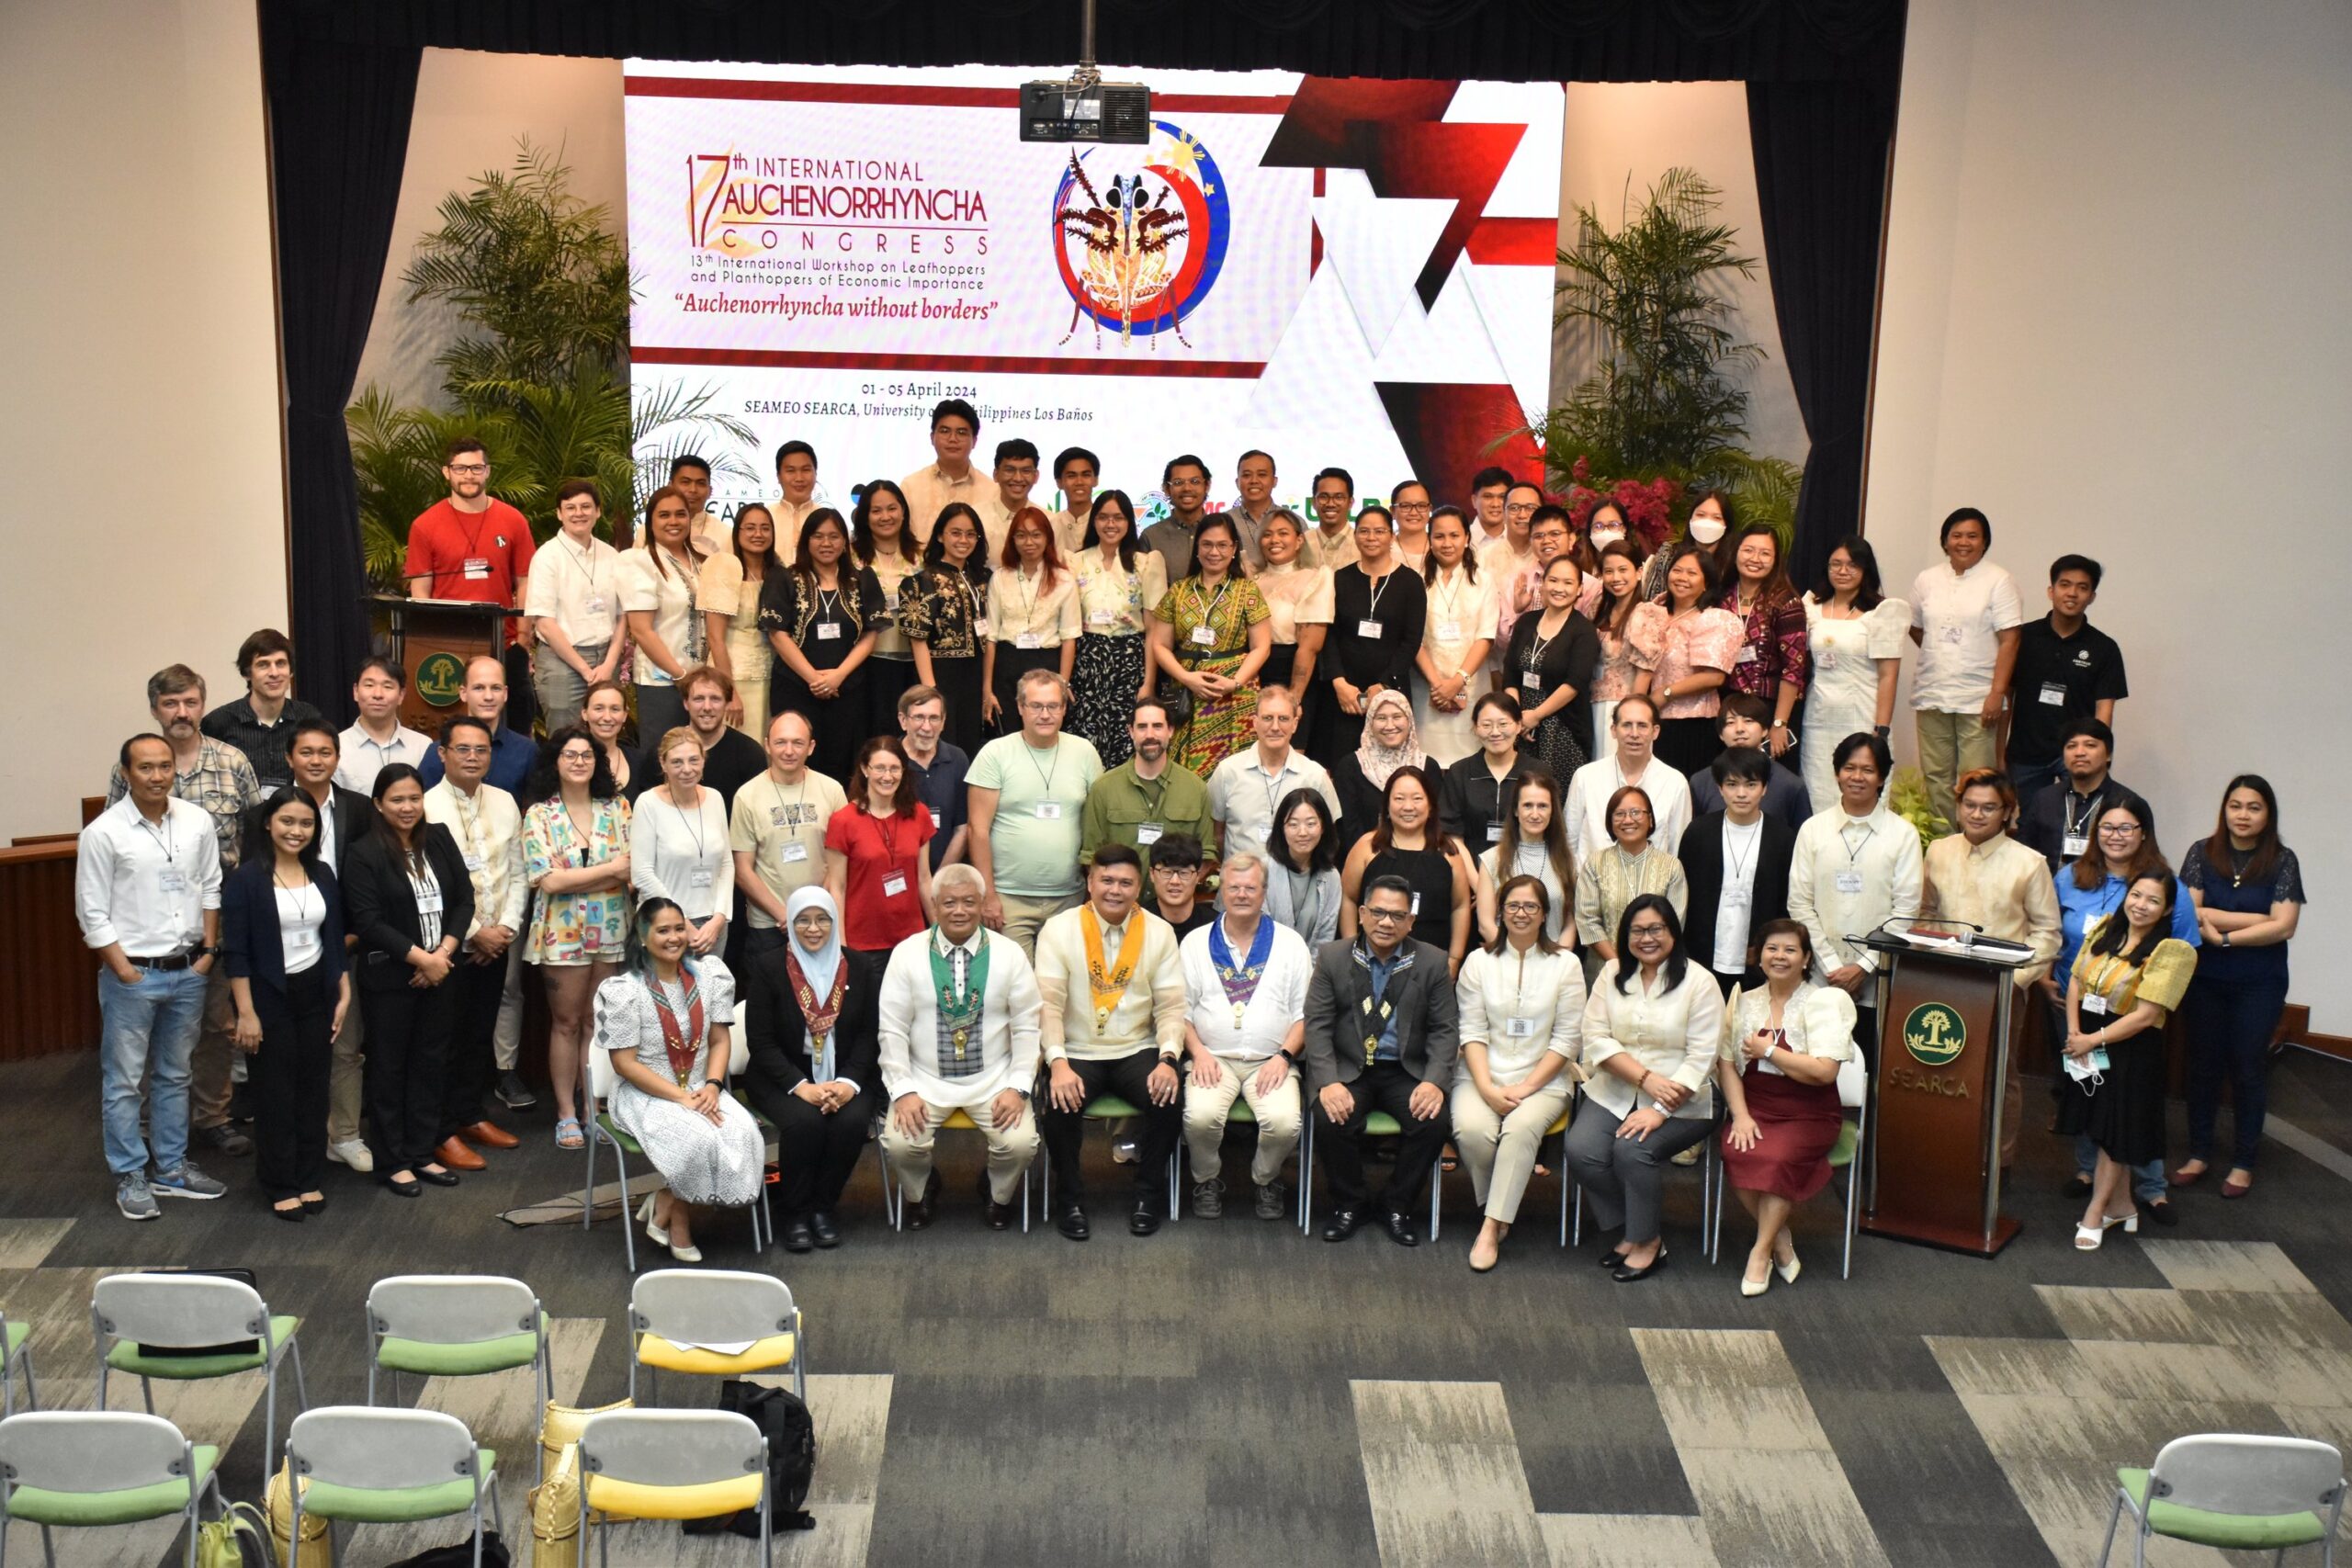 Borderless science, curious minds, hopping insects: The 17th International Auchenorrhyncha Congress at UPLB